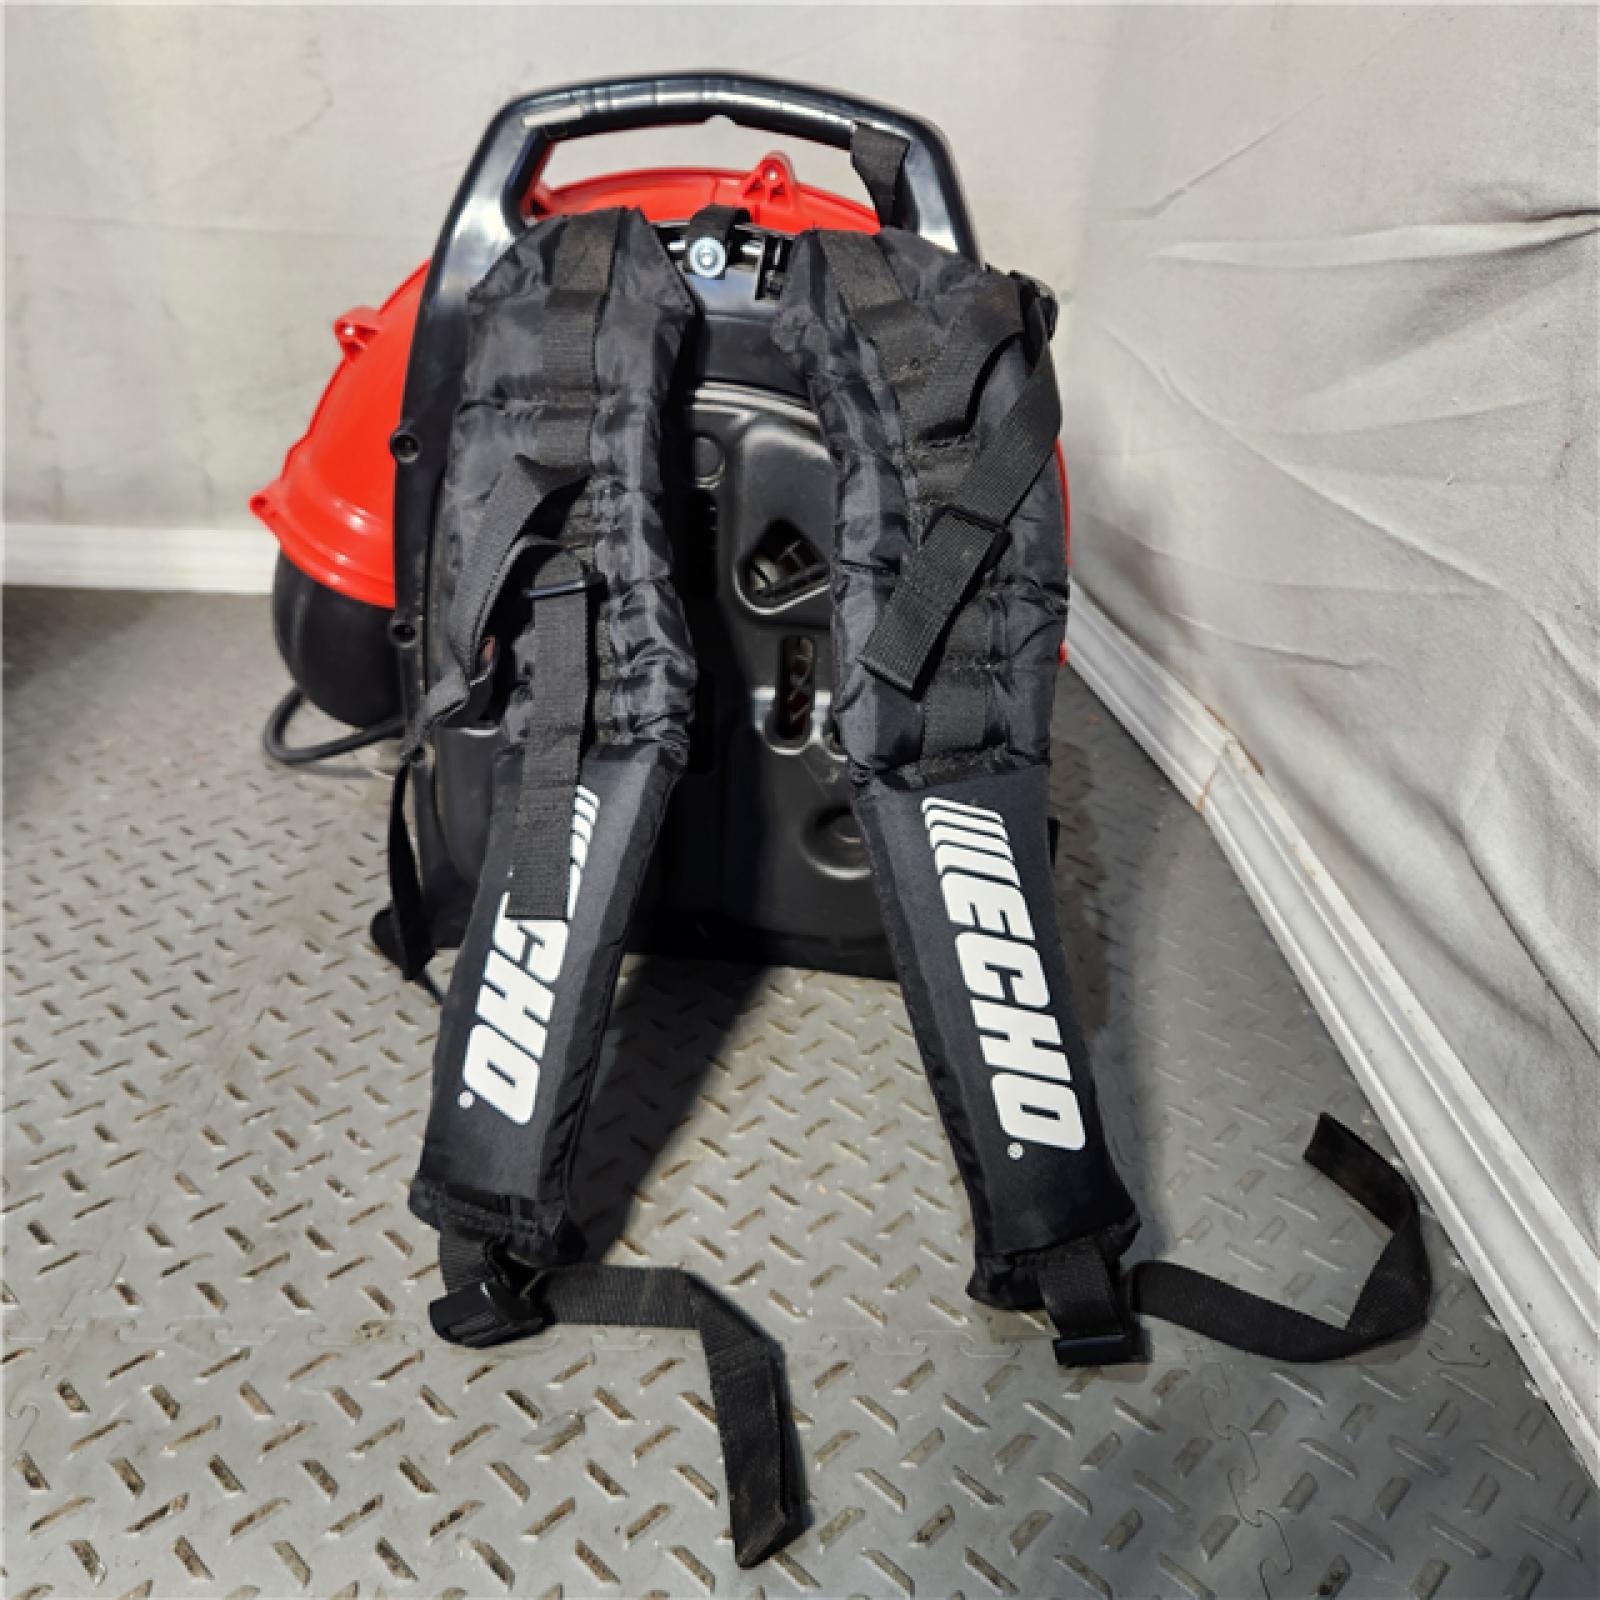 HOUSTON Location-AS-IS-ECHO 216 MPH 517 CFM 58.2cc Gas 2-Stroke Backpack Leaf Blower with Tube Throttle APPEARS IN GOOD Condition